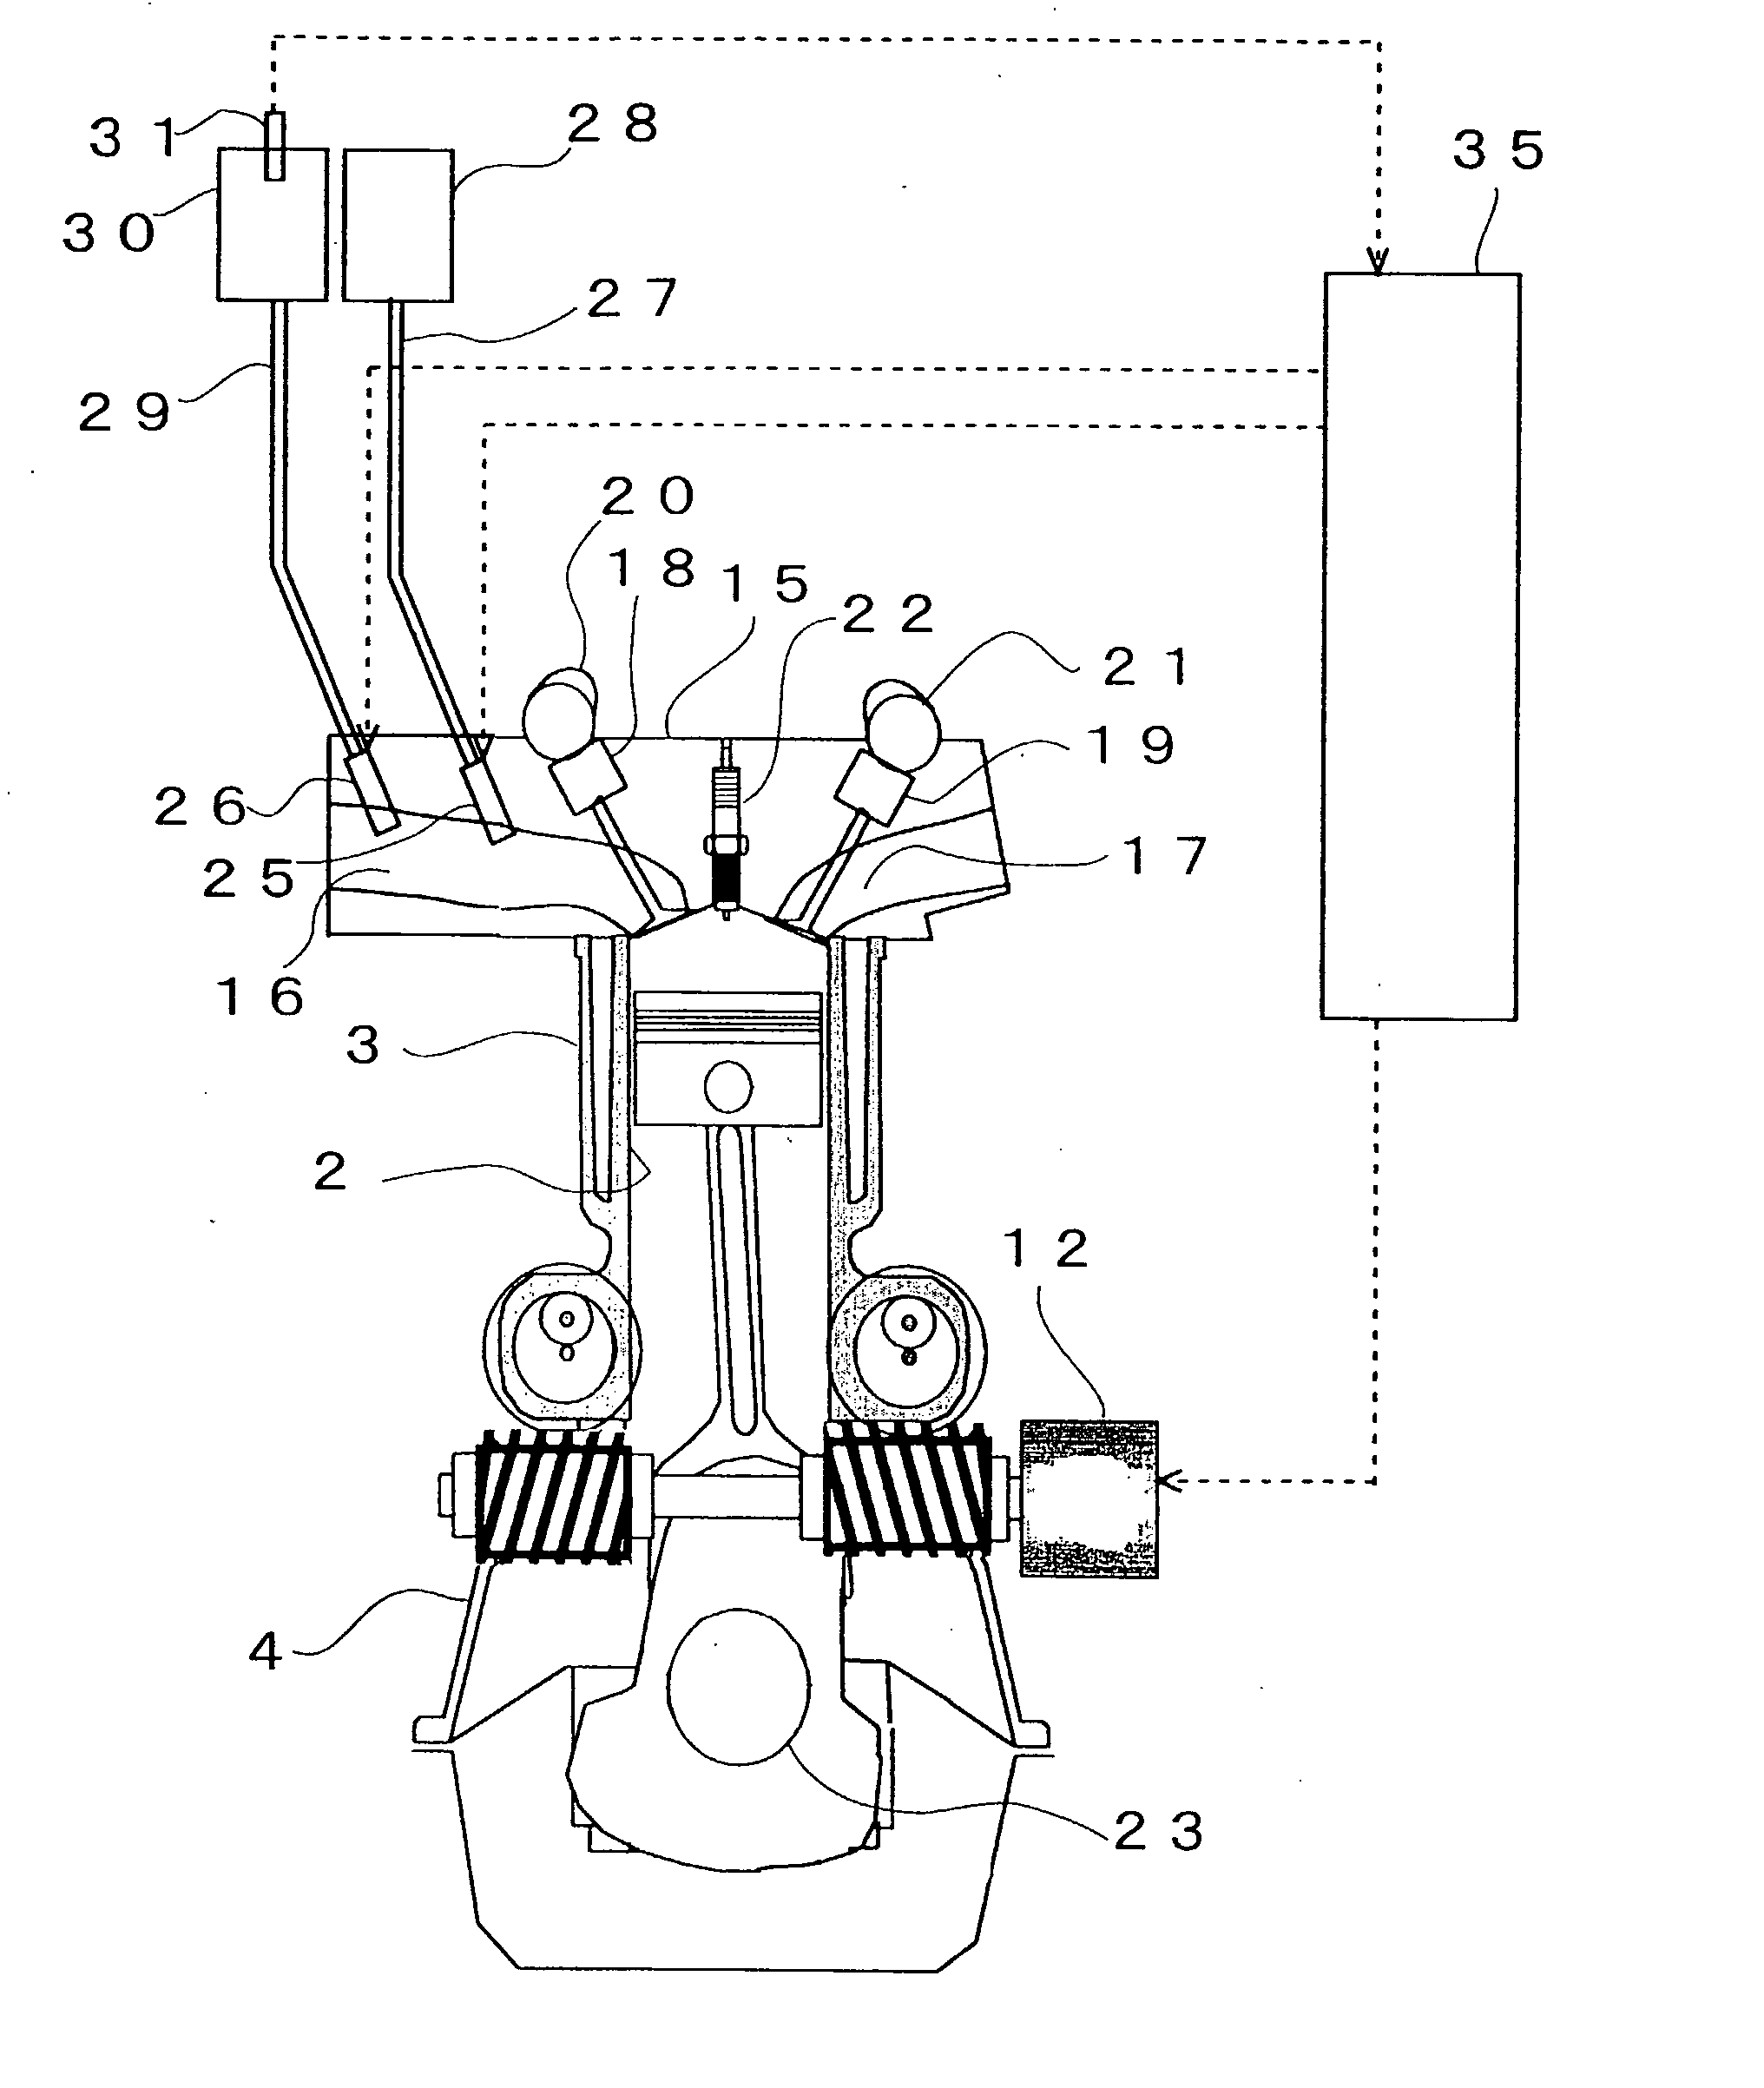 Variable Compression Ratio Internal Combustion Engine